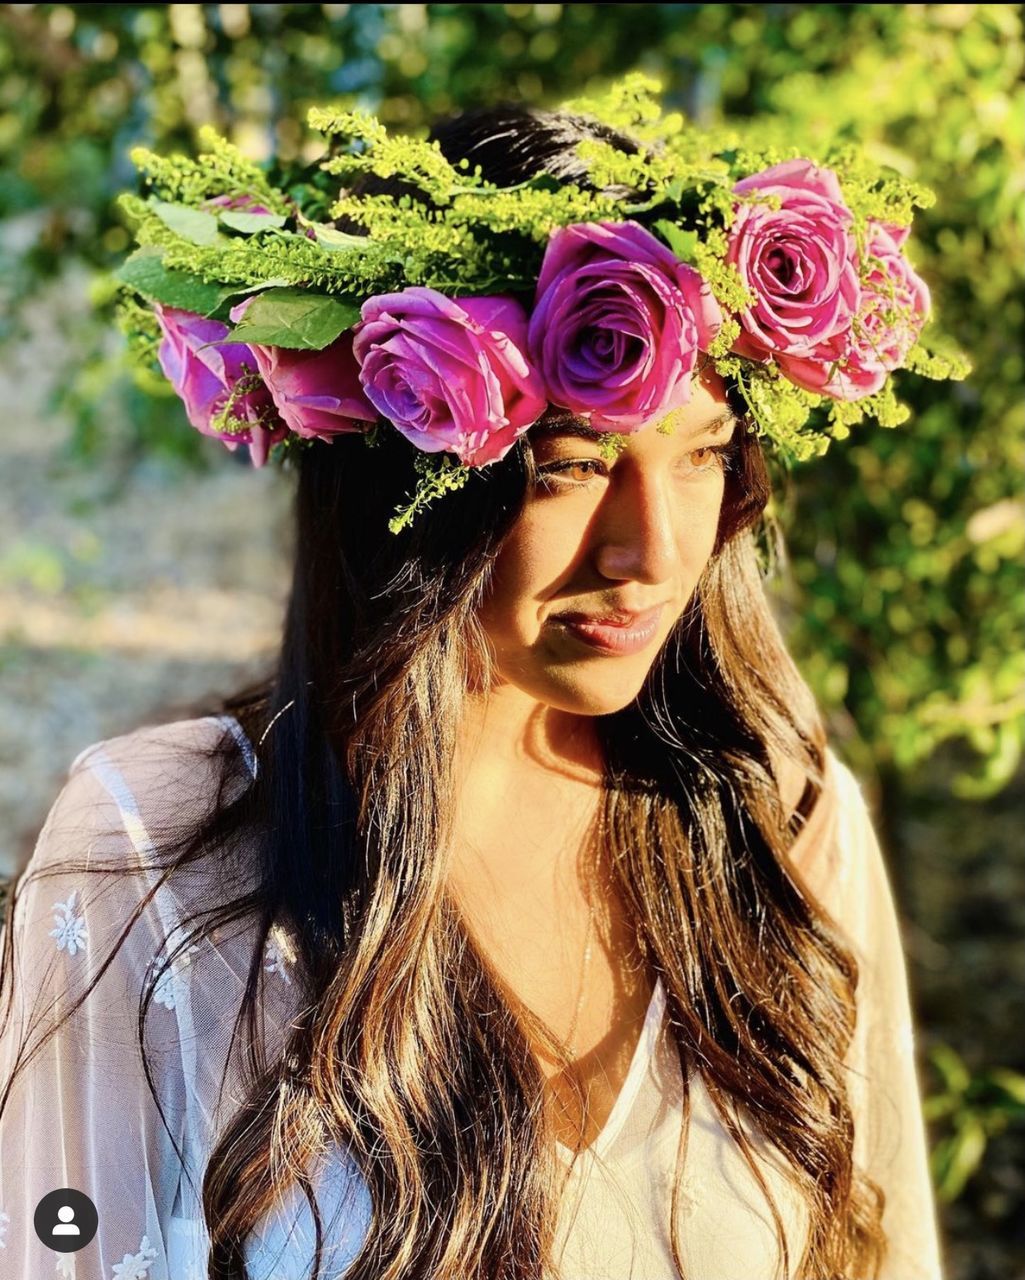 flower, flowering plant, plant, one person, long hair, women, nature, portrait, hairstyle, adult, young adult, beauty in nature, headshot, clothing, rose, pink, outdoors, fashion, brown hair, day, spring, front view, lifestyles, focus on foreground, female, sunlight, freshness, leisure activity, close-up, looking at camera, looking, smiling, person, emotion, dress, fragility, flower arrangement